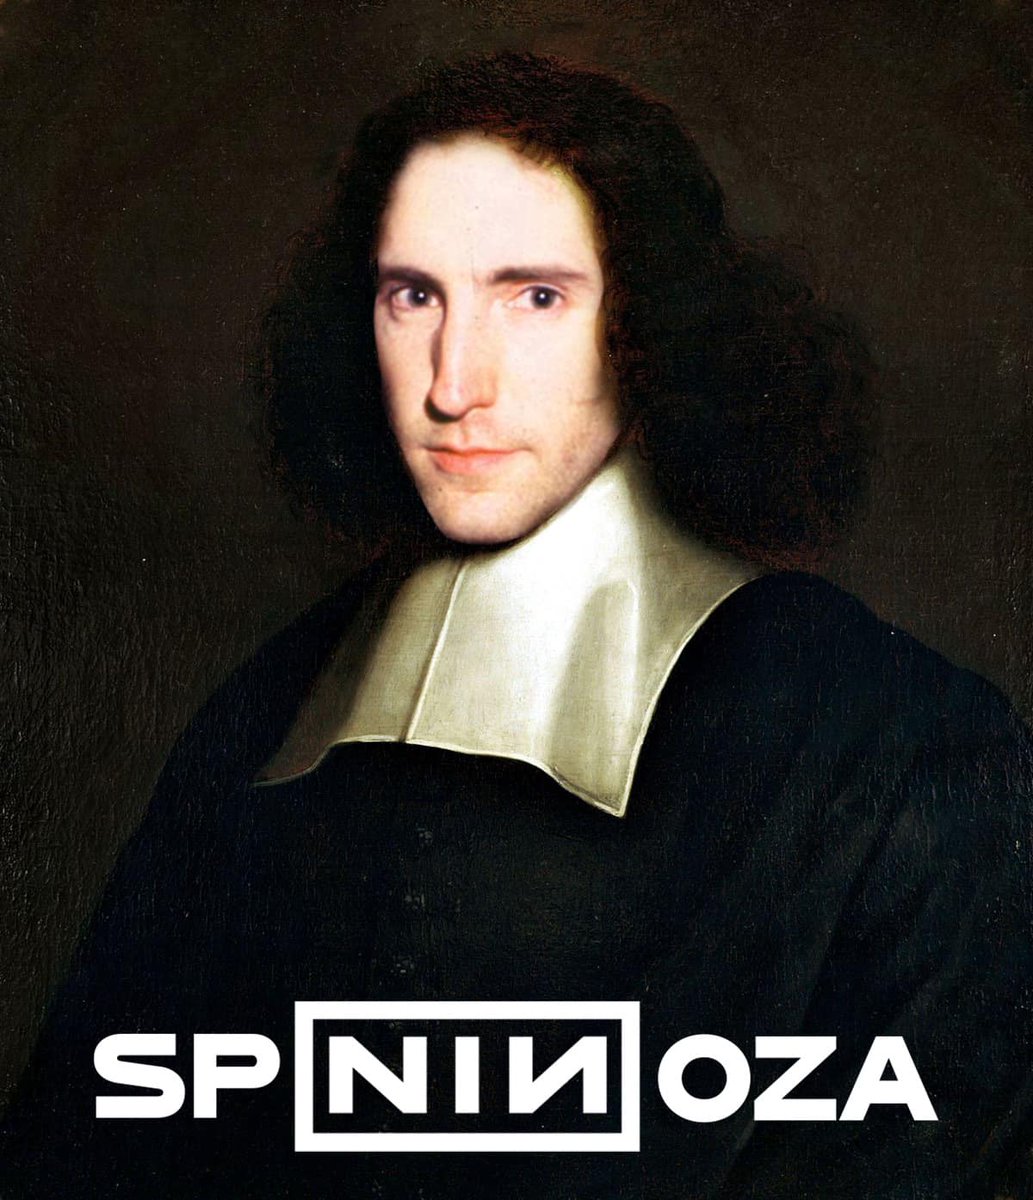 Why do men fight for their servitude as stubbornly as though it were their salvation?
#Spinoza @nineinchnails